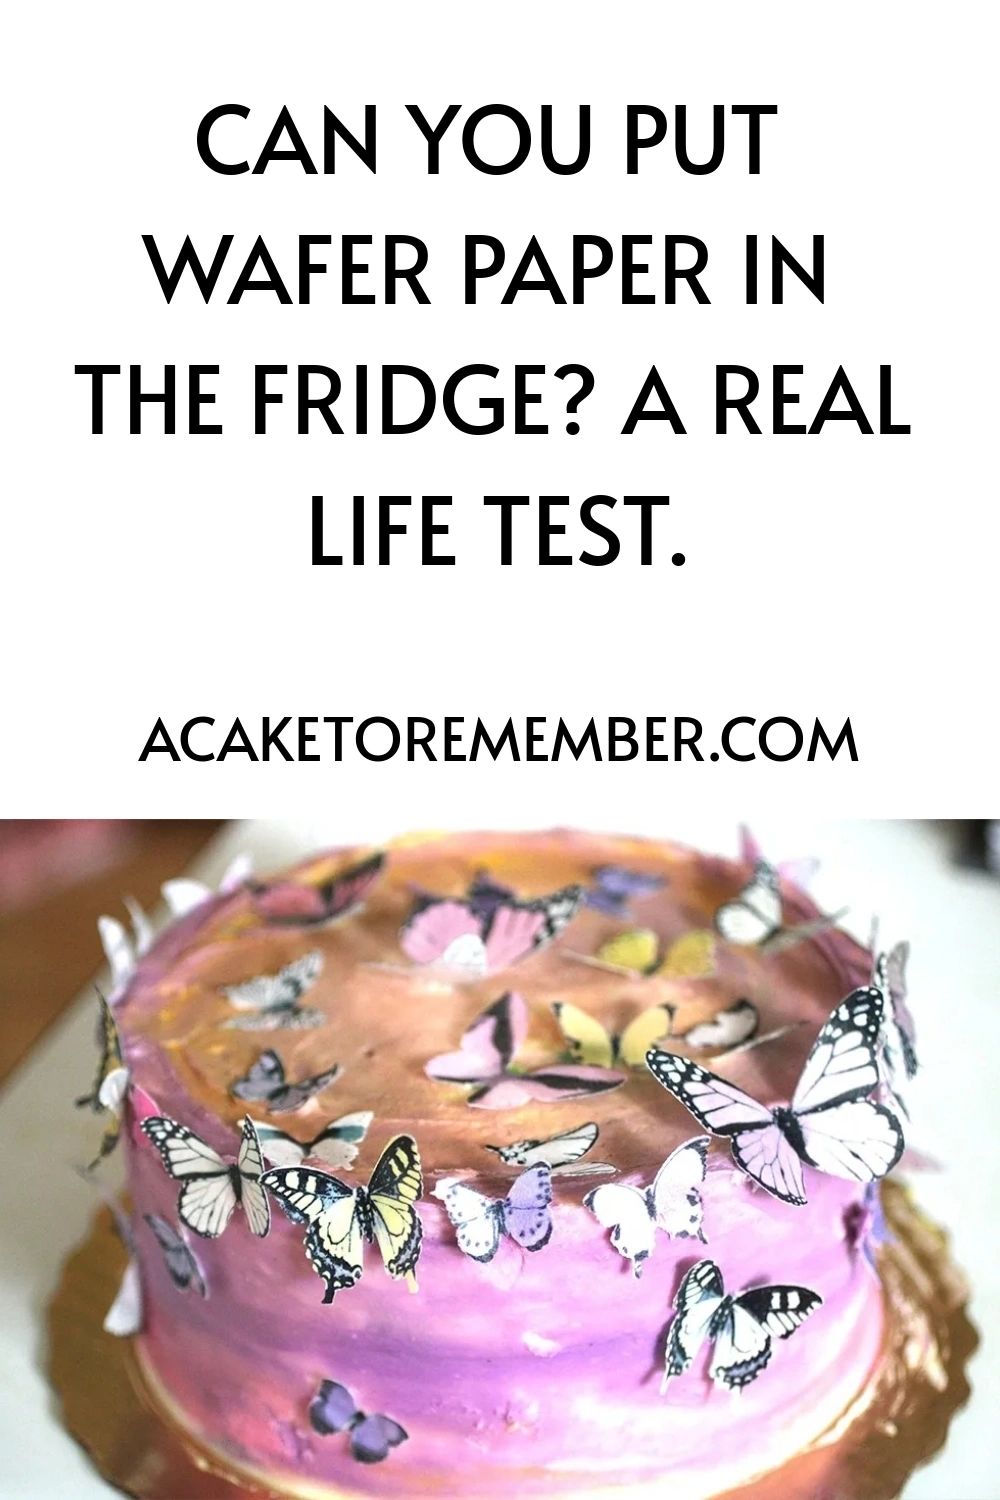 Can You Put Wafer Paper In The Fridge? A Real Life Test.